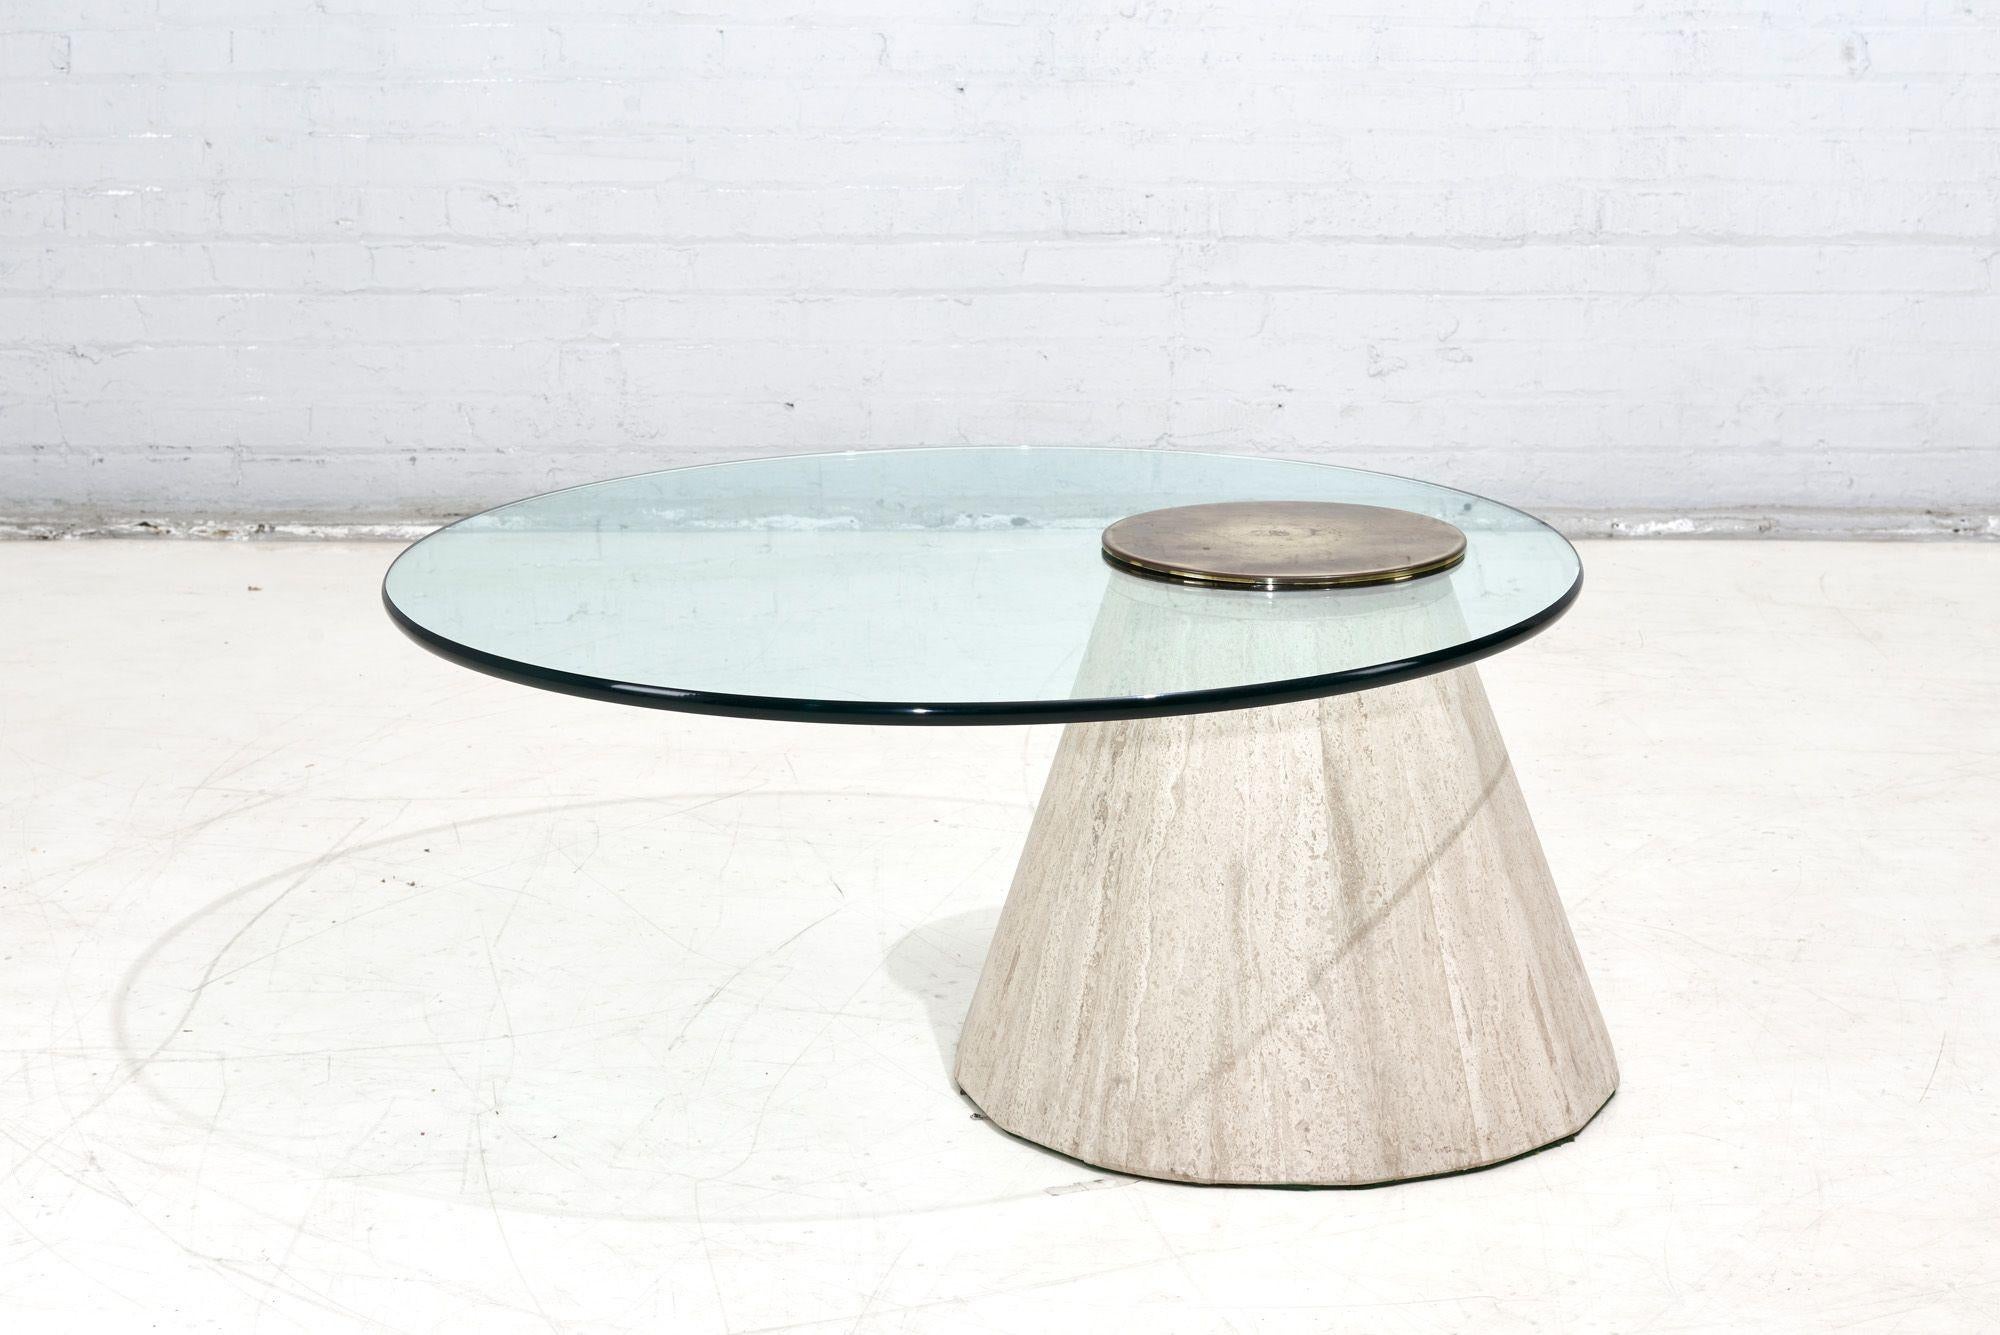 Travertine and brass Cantilevered coffee table by La Rosa, 1960. Brass patina cap has beautiful patina.